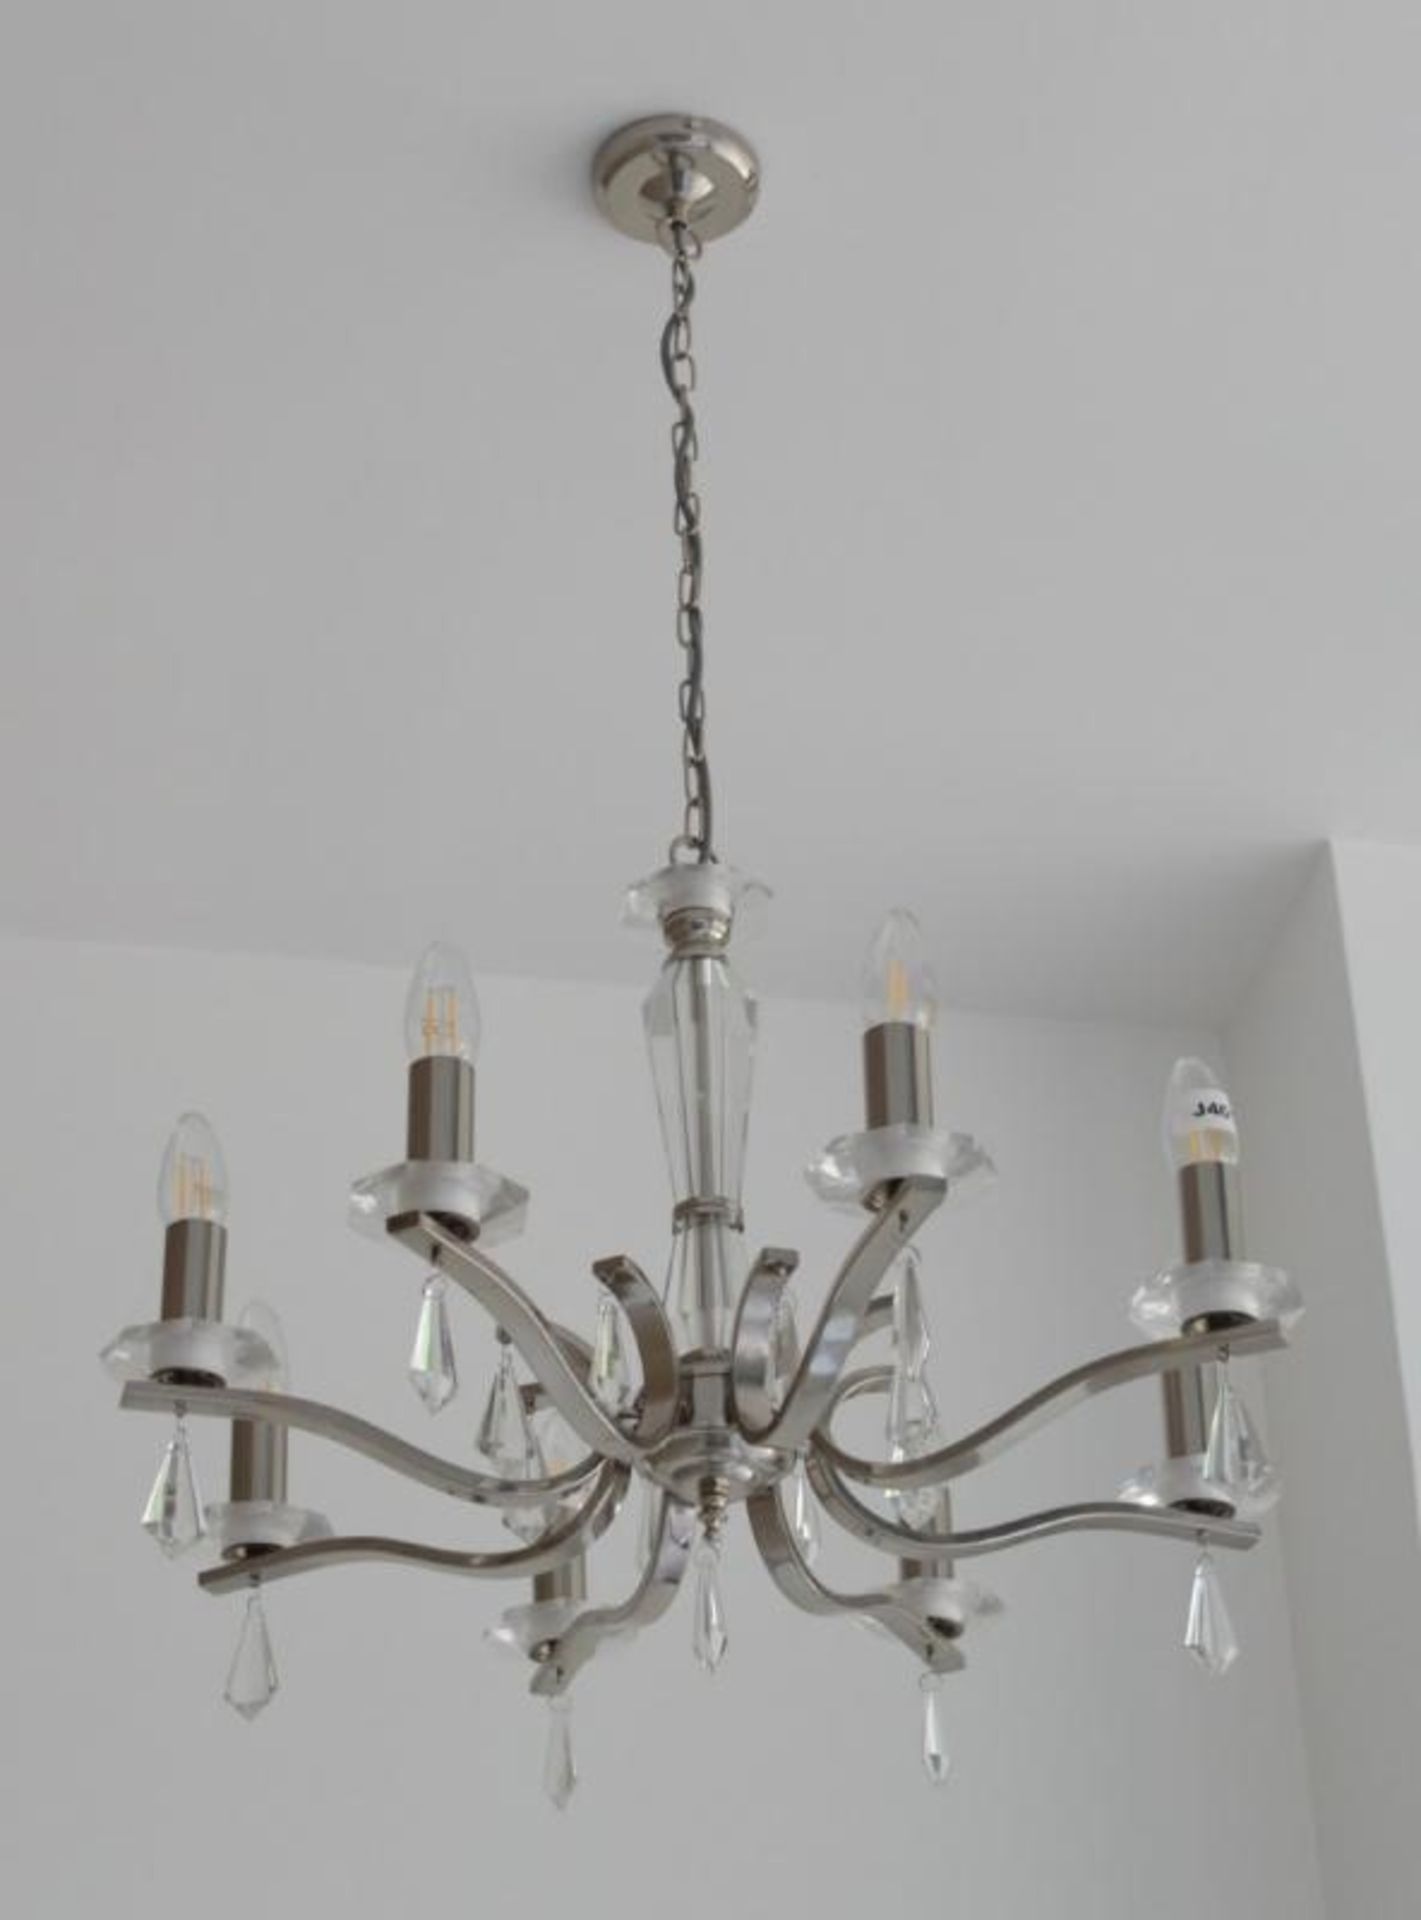 1 x Royale Satin Silver Metal 8 Light Ceiling Fitting With Hexagonal Glass Sconces - Ex Display Stoc - Image 2 of 6